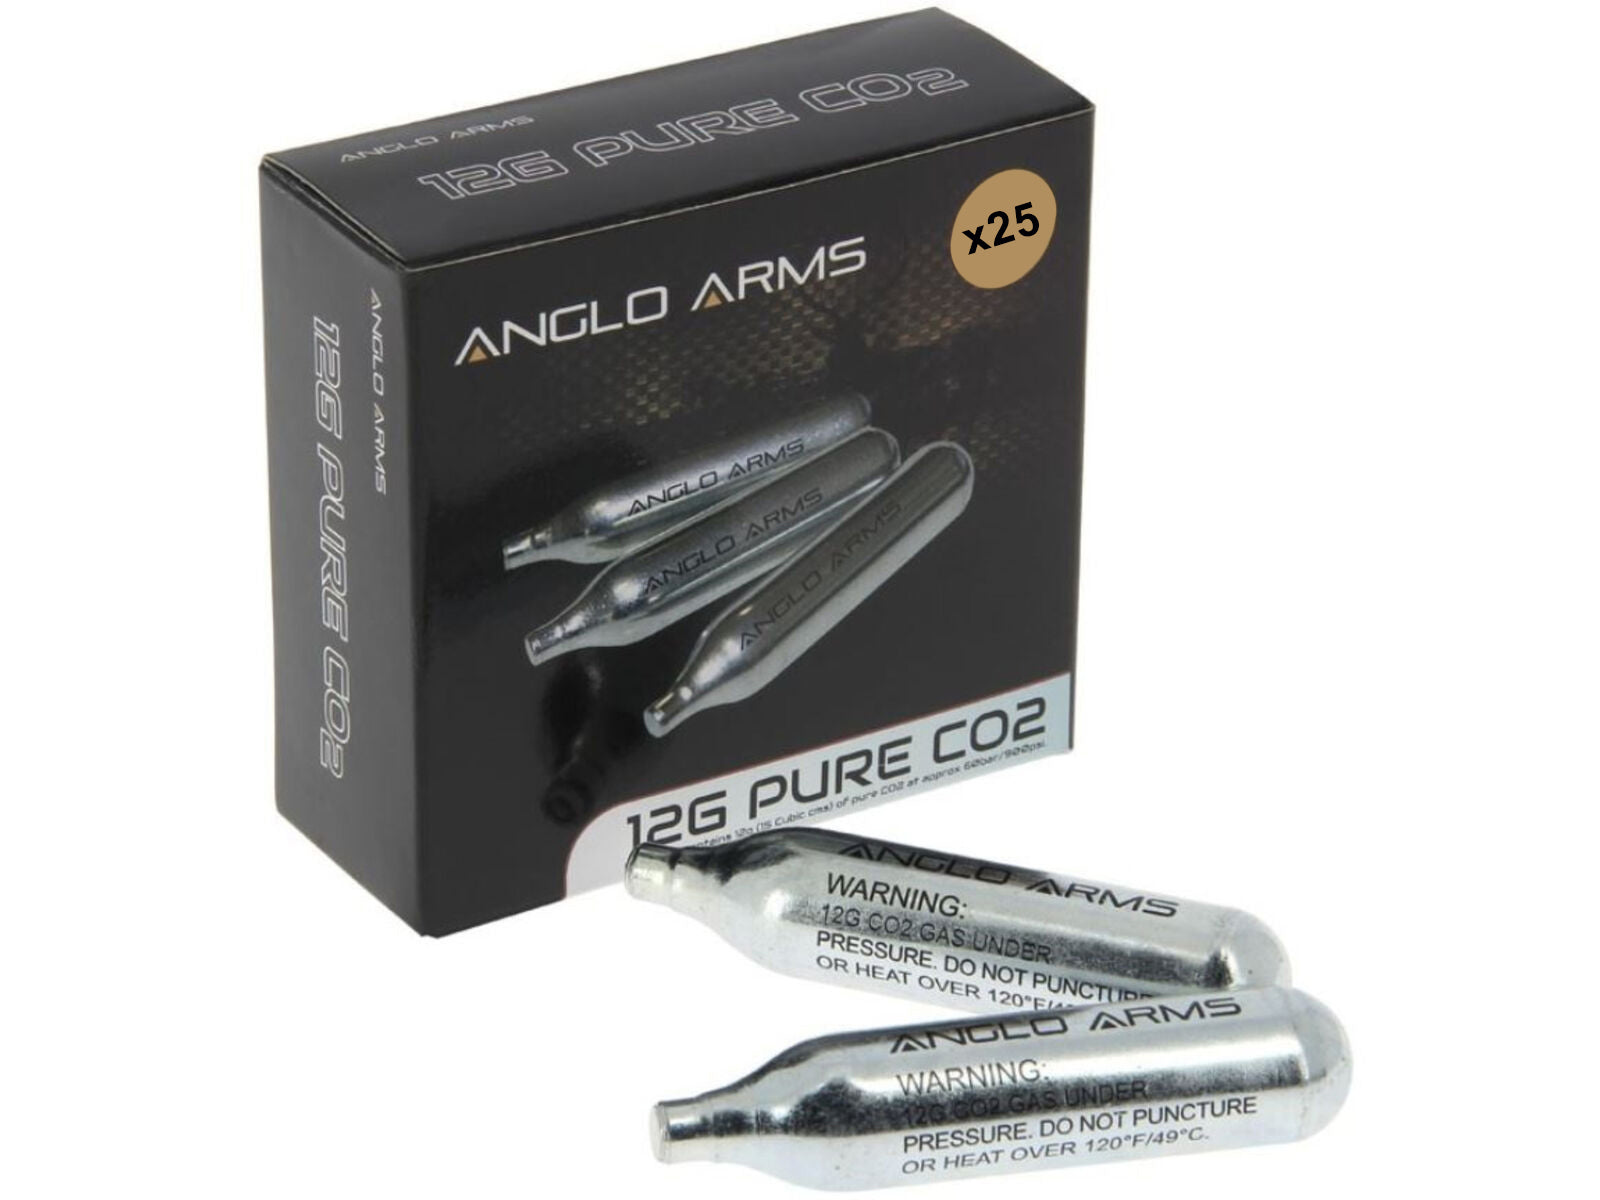 ANGLO ARMS 25 X ANGLO ARMS 12G GRAM CO2 CAPSULE CARTRIDGE SET